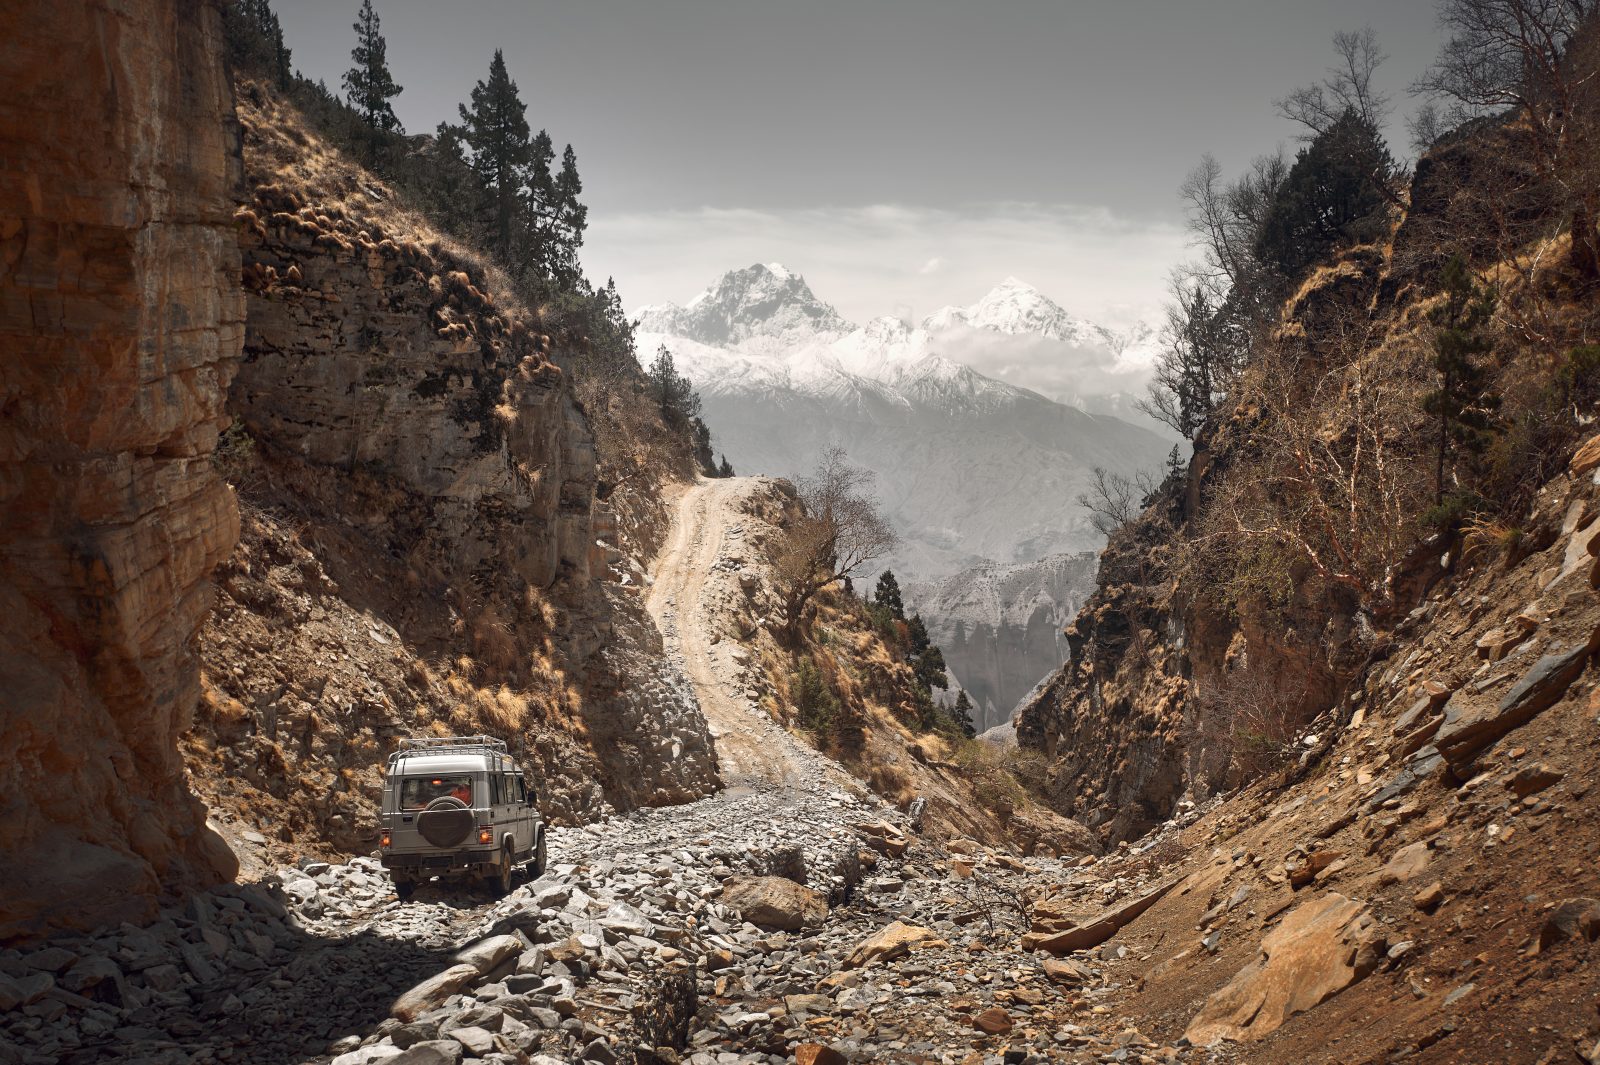 Off-road vehicle goes an extreme mountain path during an expedition to Himalayas